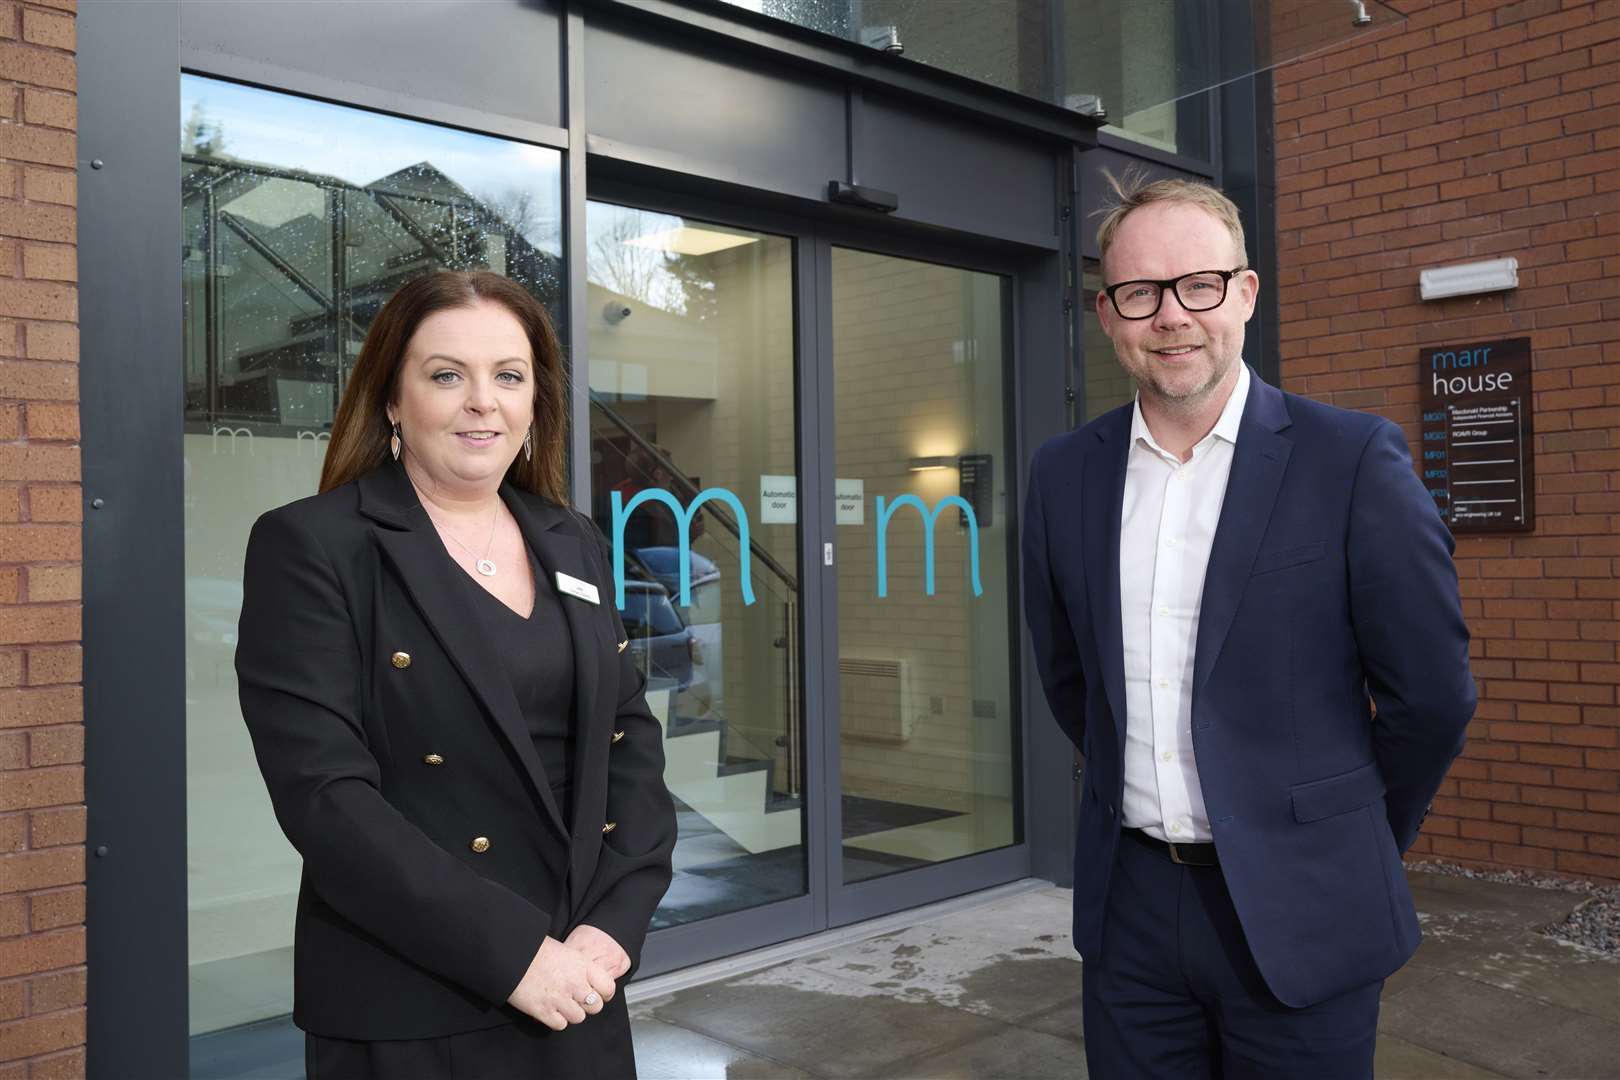 Julie Lister welcomes new tenant Ross Macdonald, of Macdonald Partnership, to Marr House.